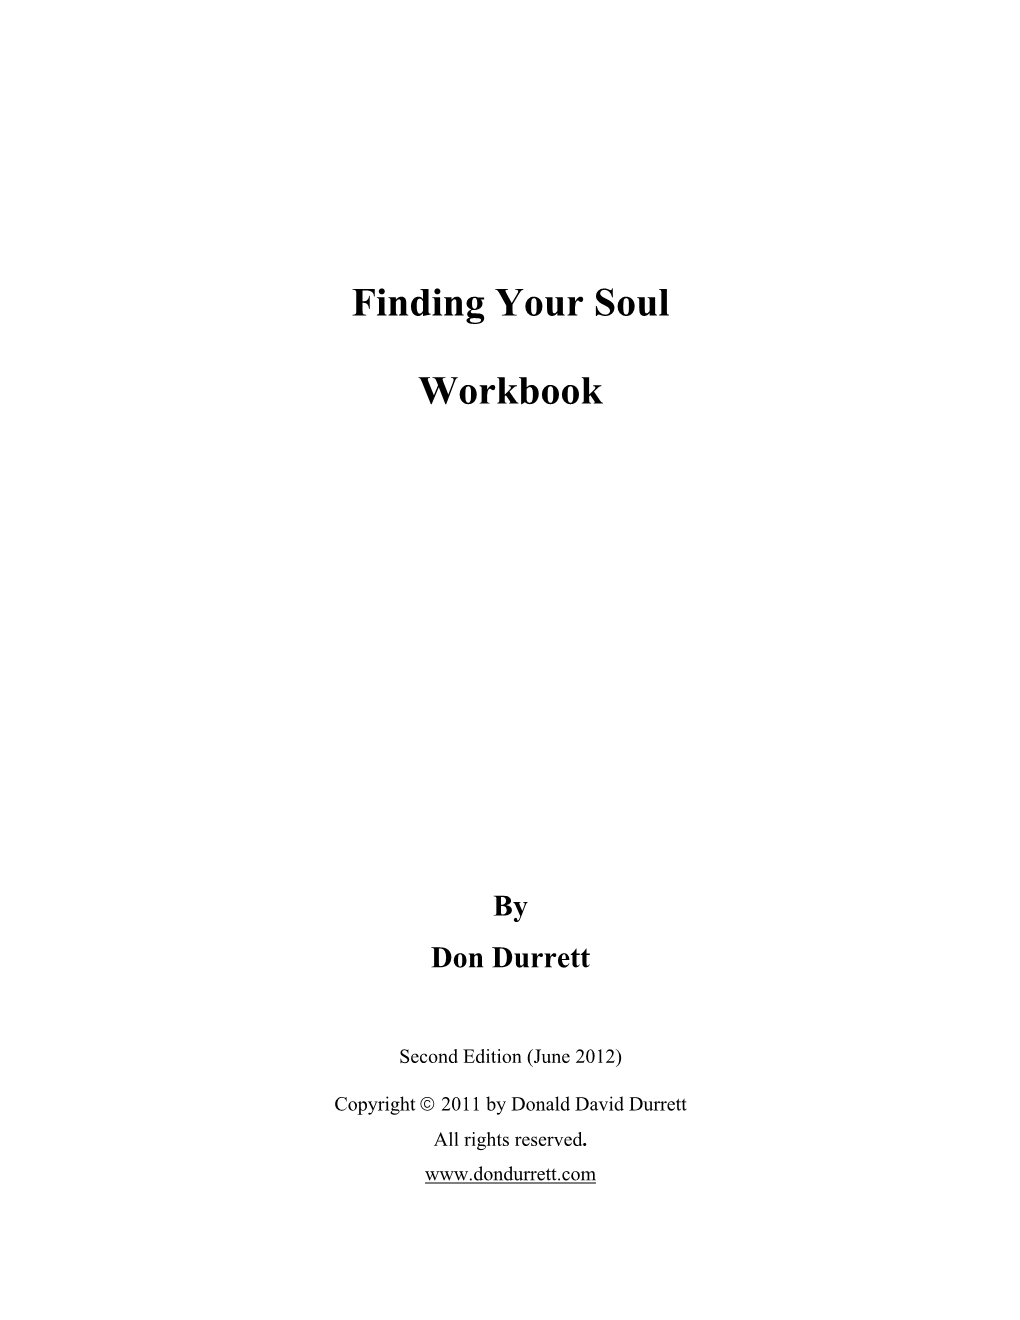 Finding Your Soul Workbook